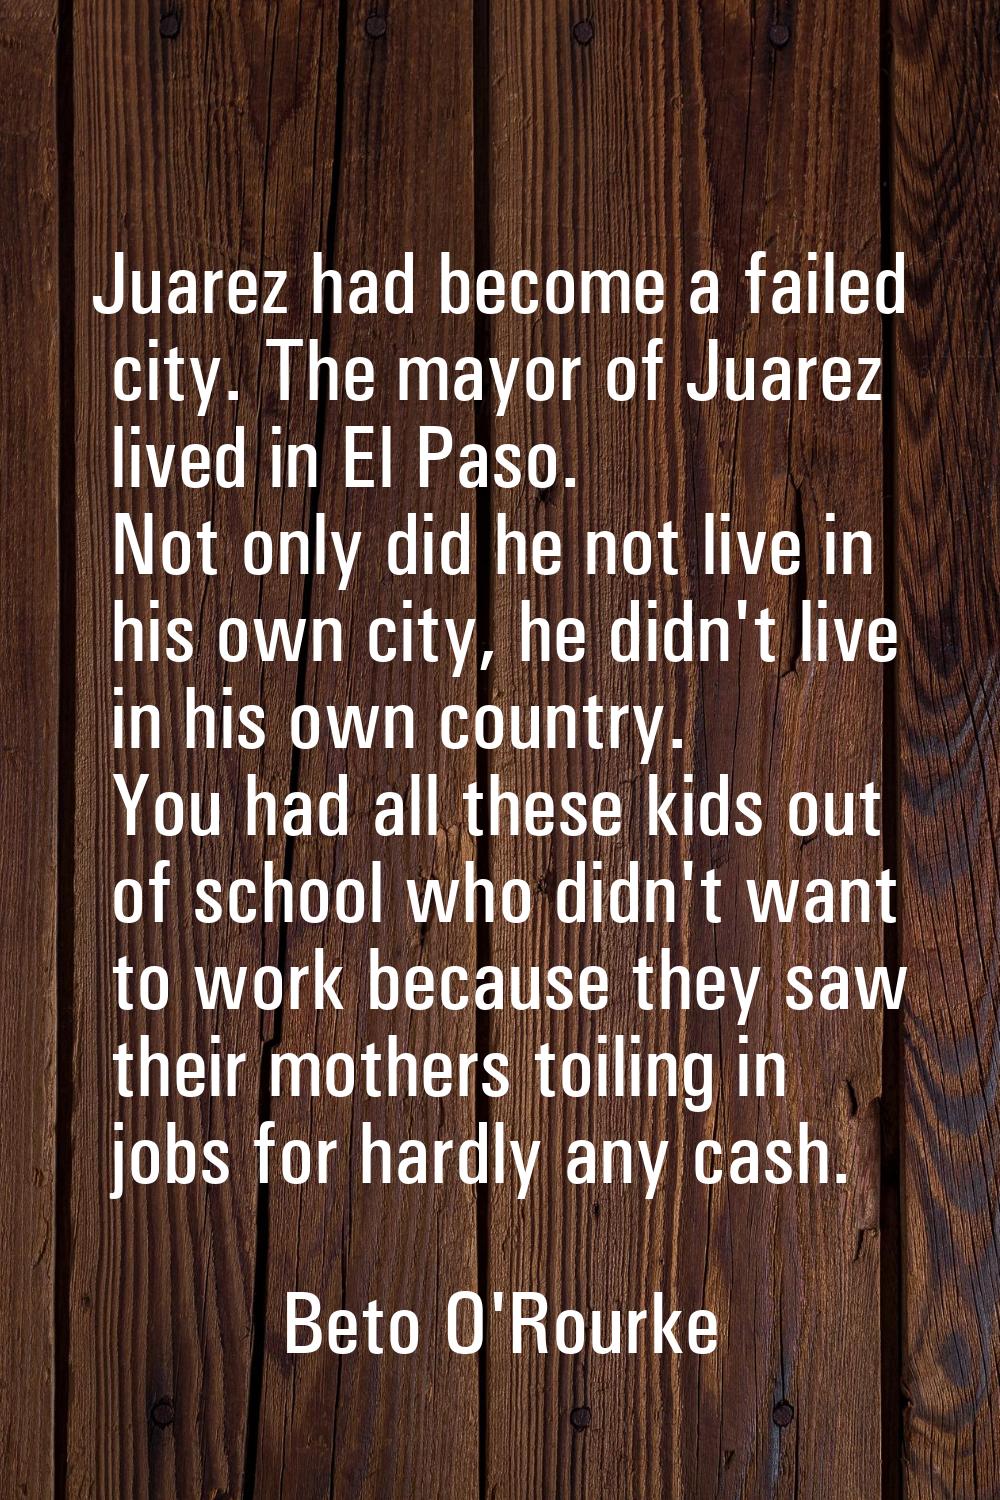 Juarez had become a failed city. The mayor of Juarez lived in El Paso. Not only did he not live in 